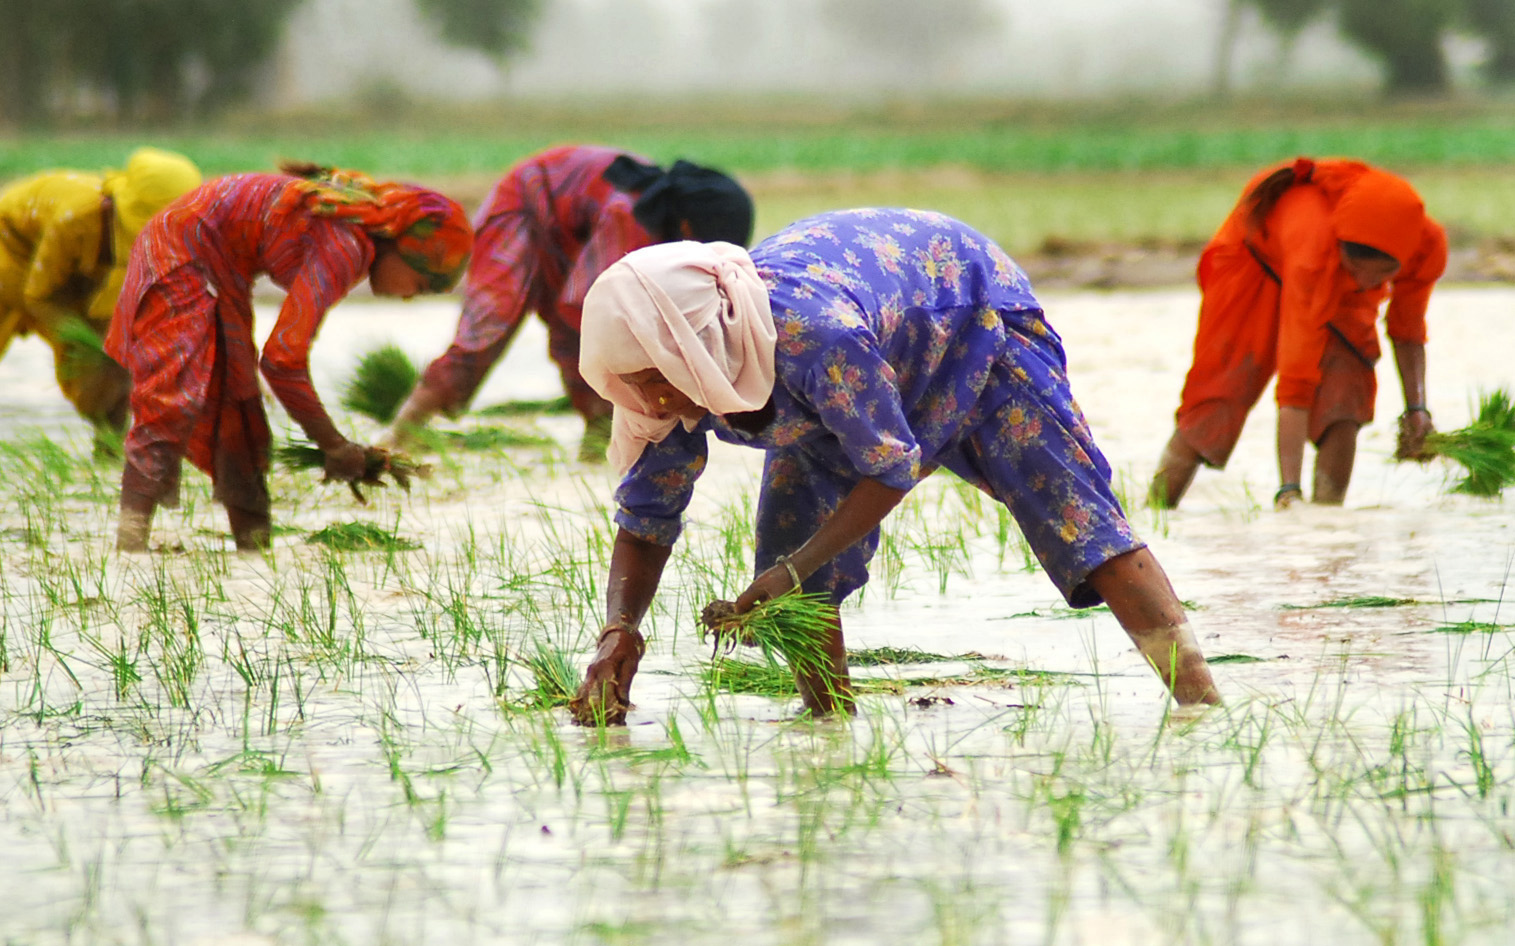 Haryana Agriculture Department targets 1 lakh acre to reduce paddy cultivation